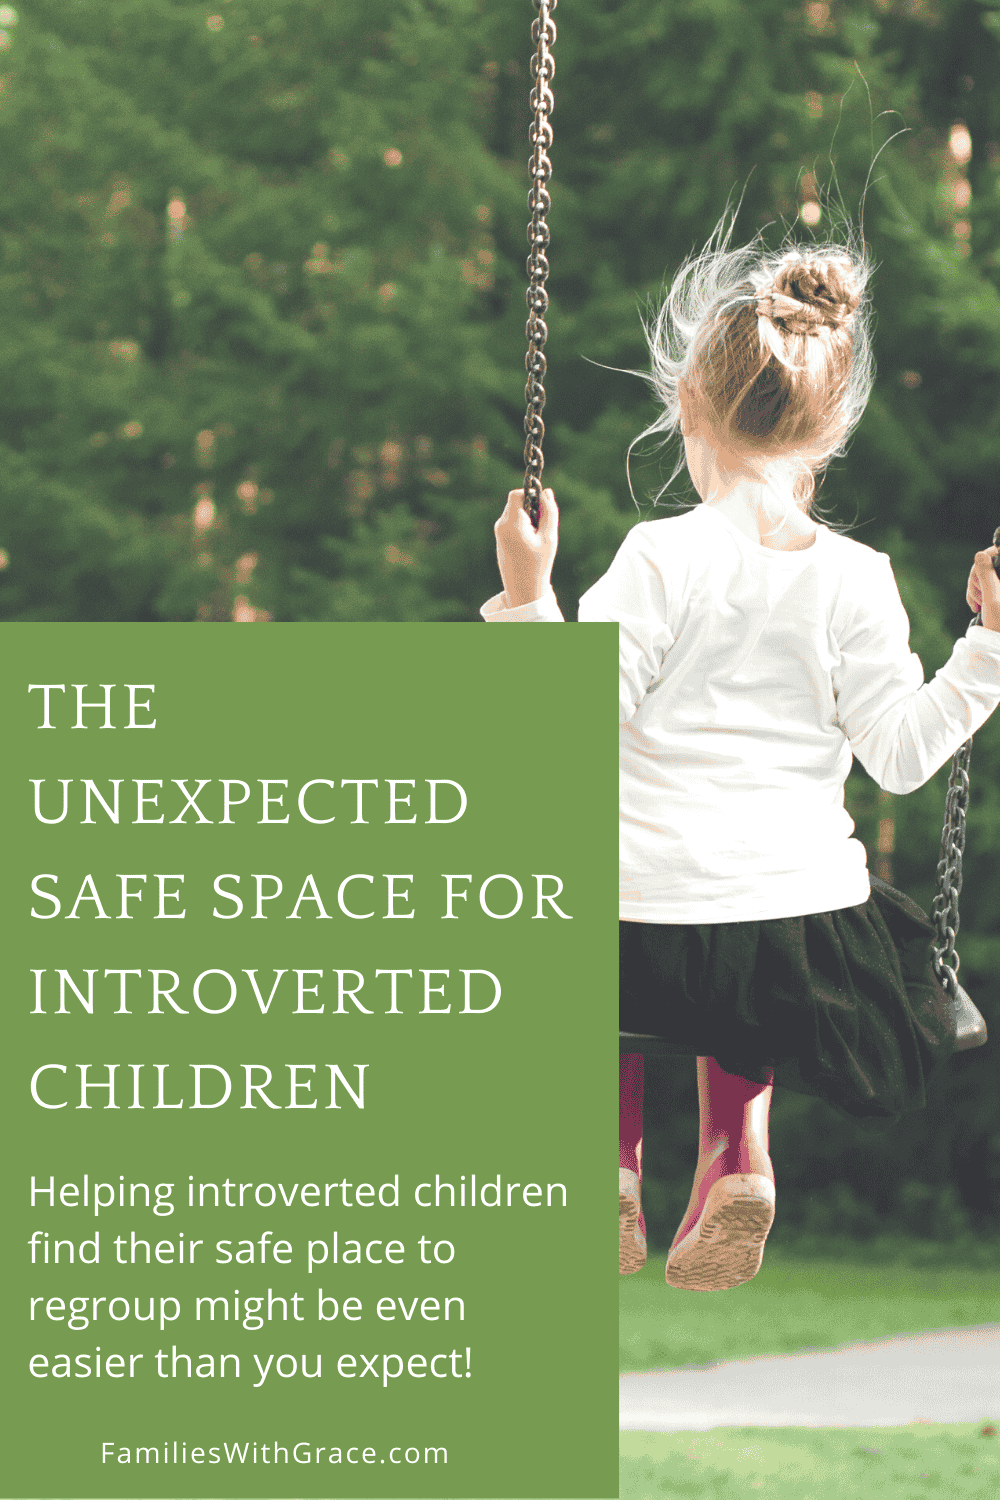 The unexpected safe space for introverted children